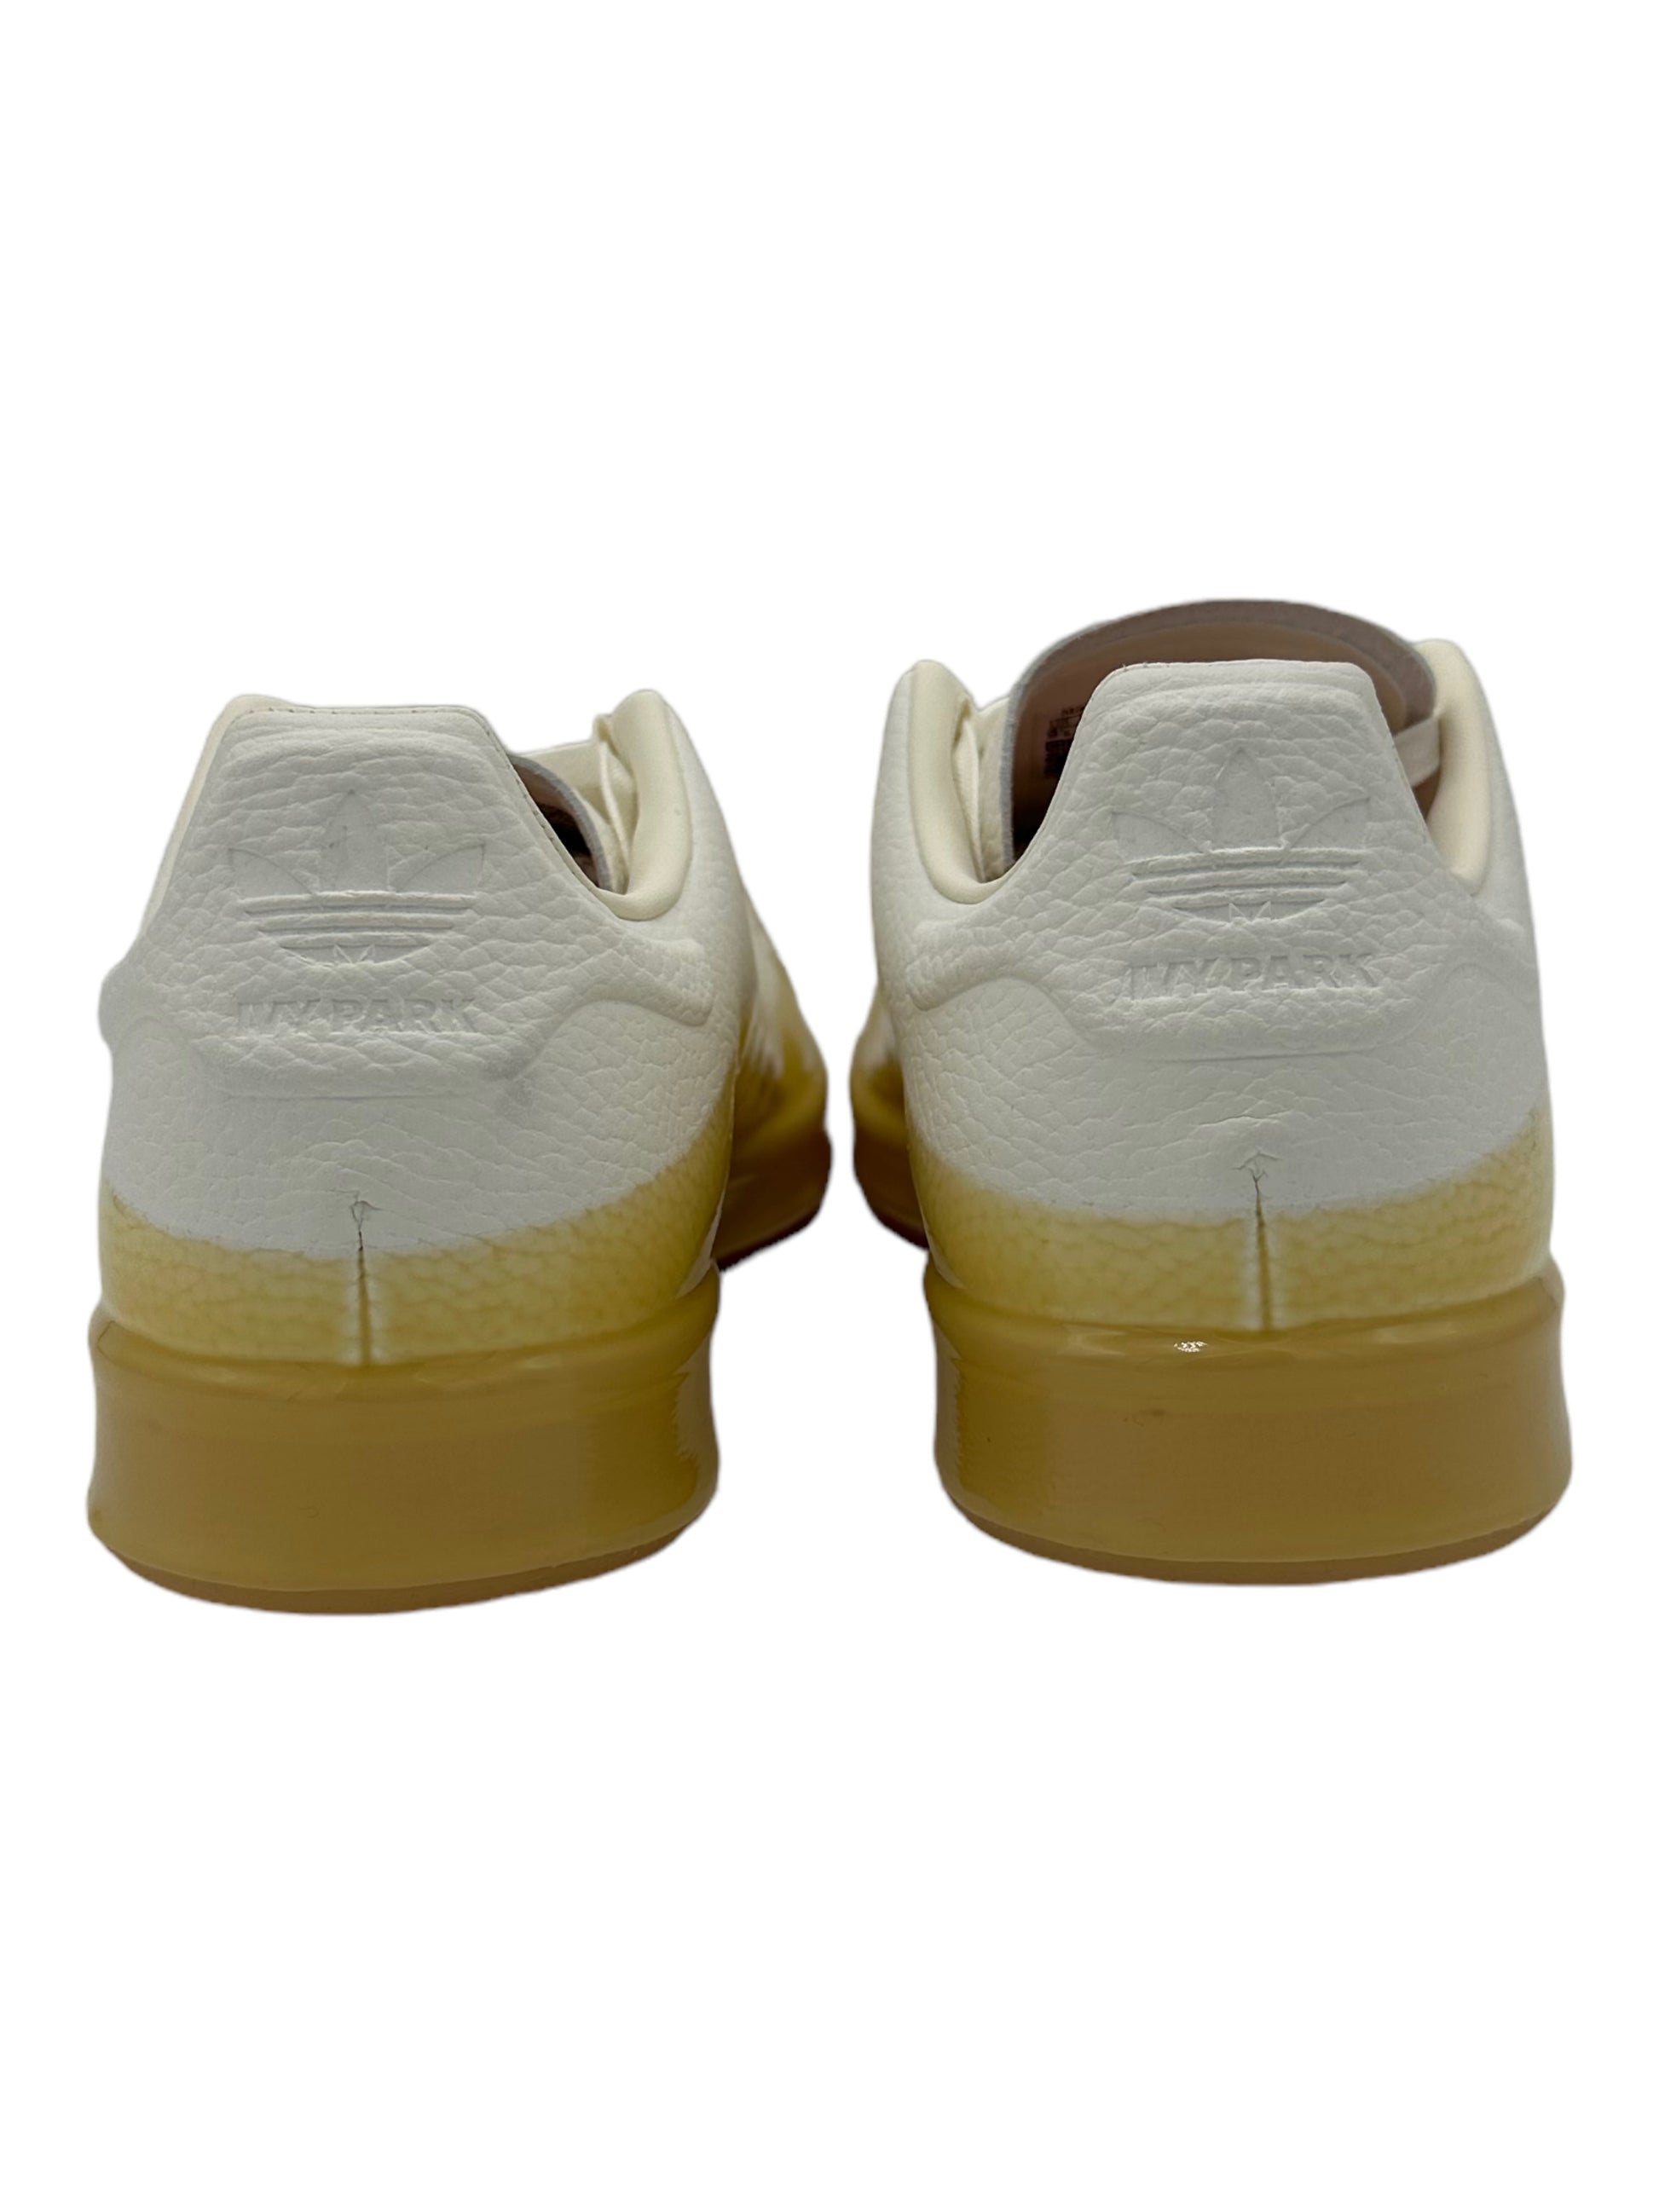 Adidas Stan Smith Dipped Beyonce Ivy Park White Sneakers - Genuine Design Luxury Consignment for Men. New & Pre-Owned Clothing, Shoes, & Accessories. Calgary, Canada